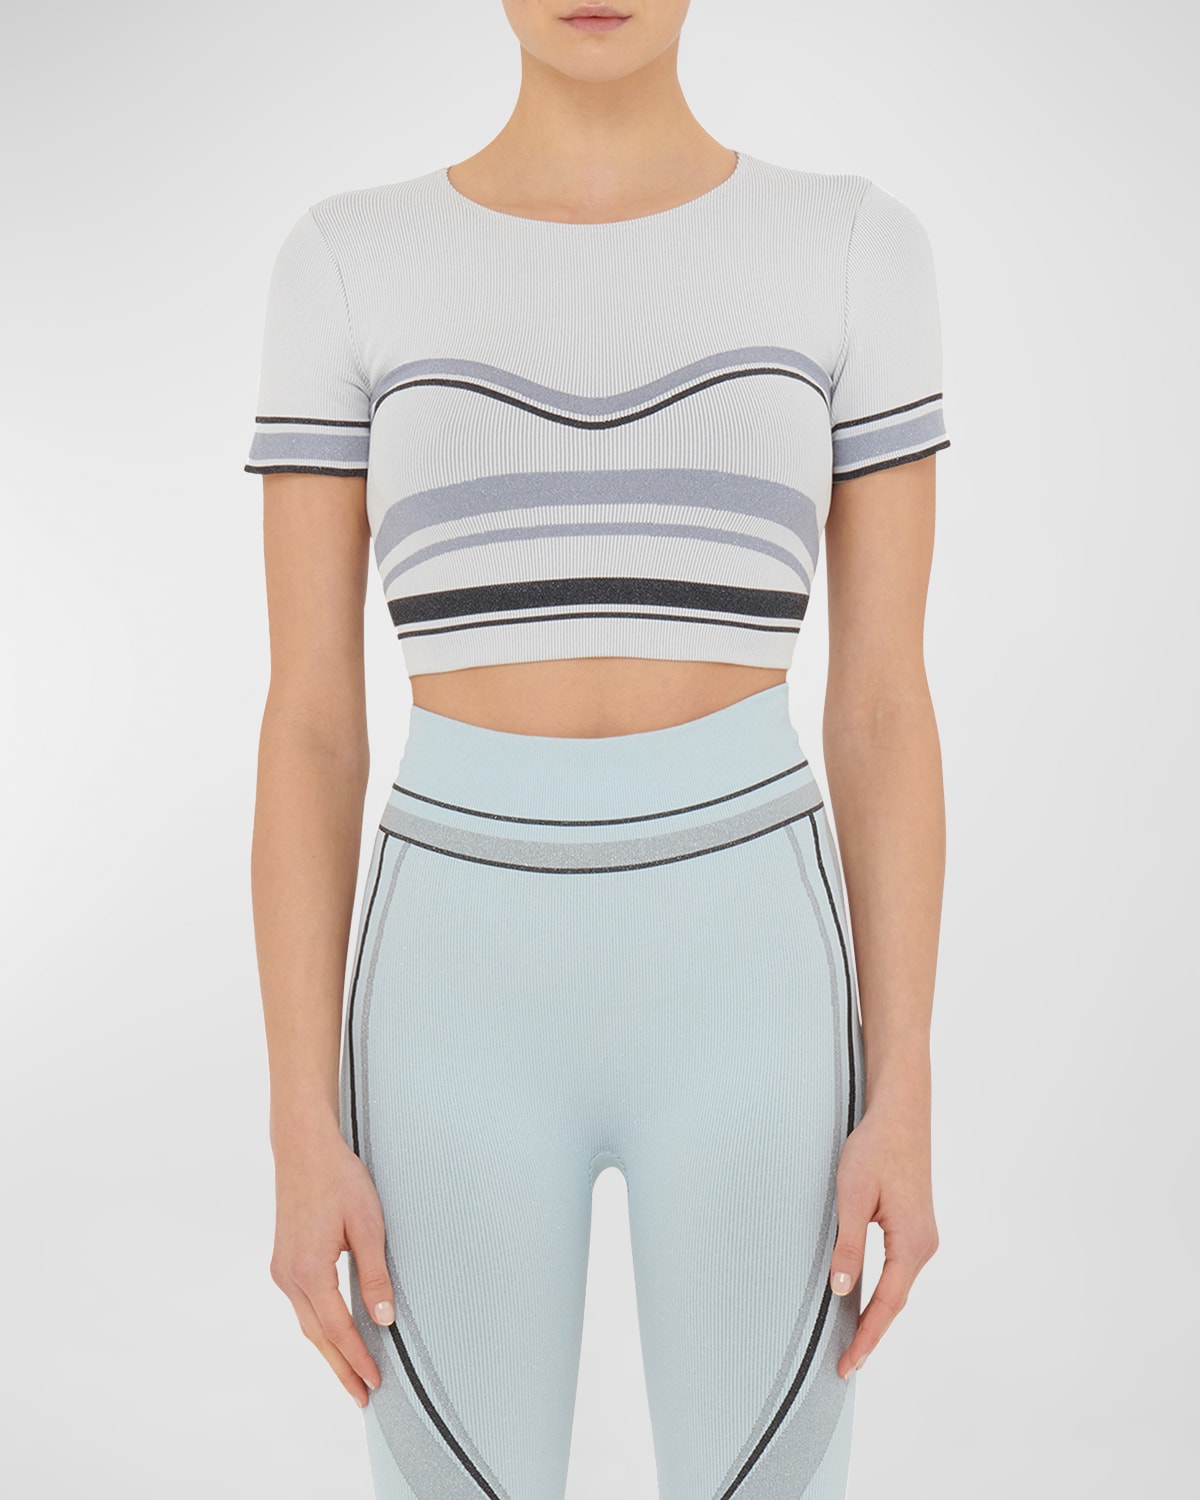 Shaping Stripes Crop Top